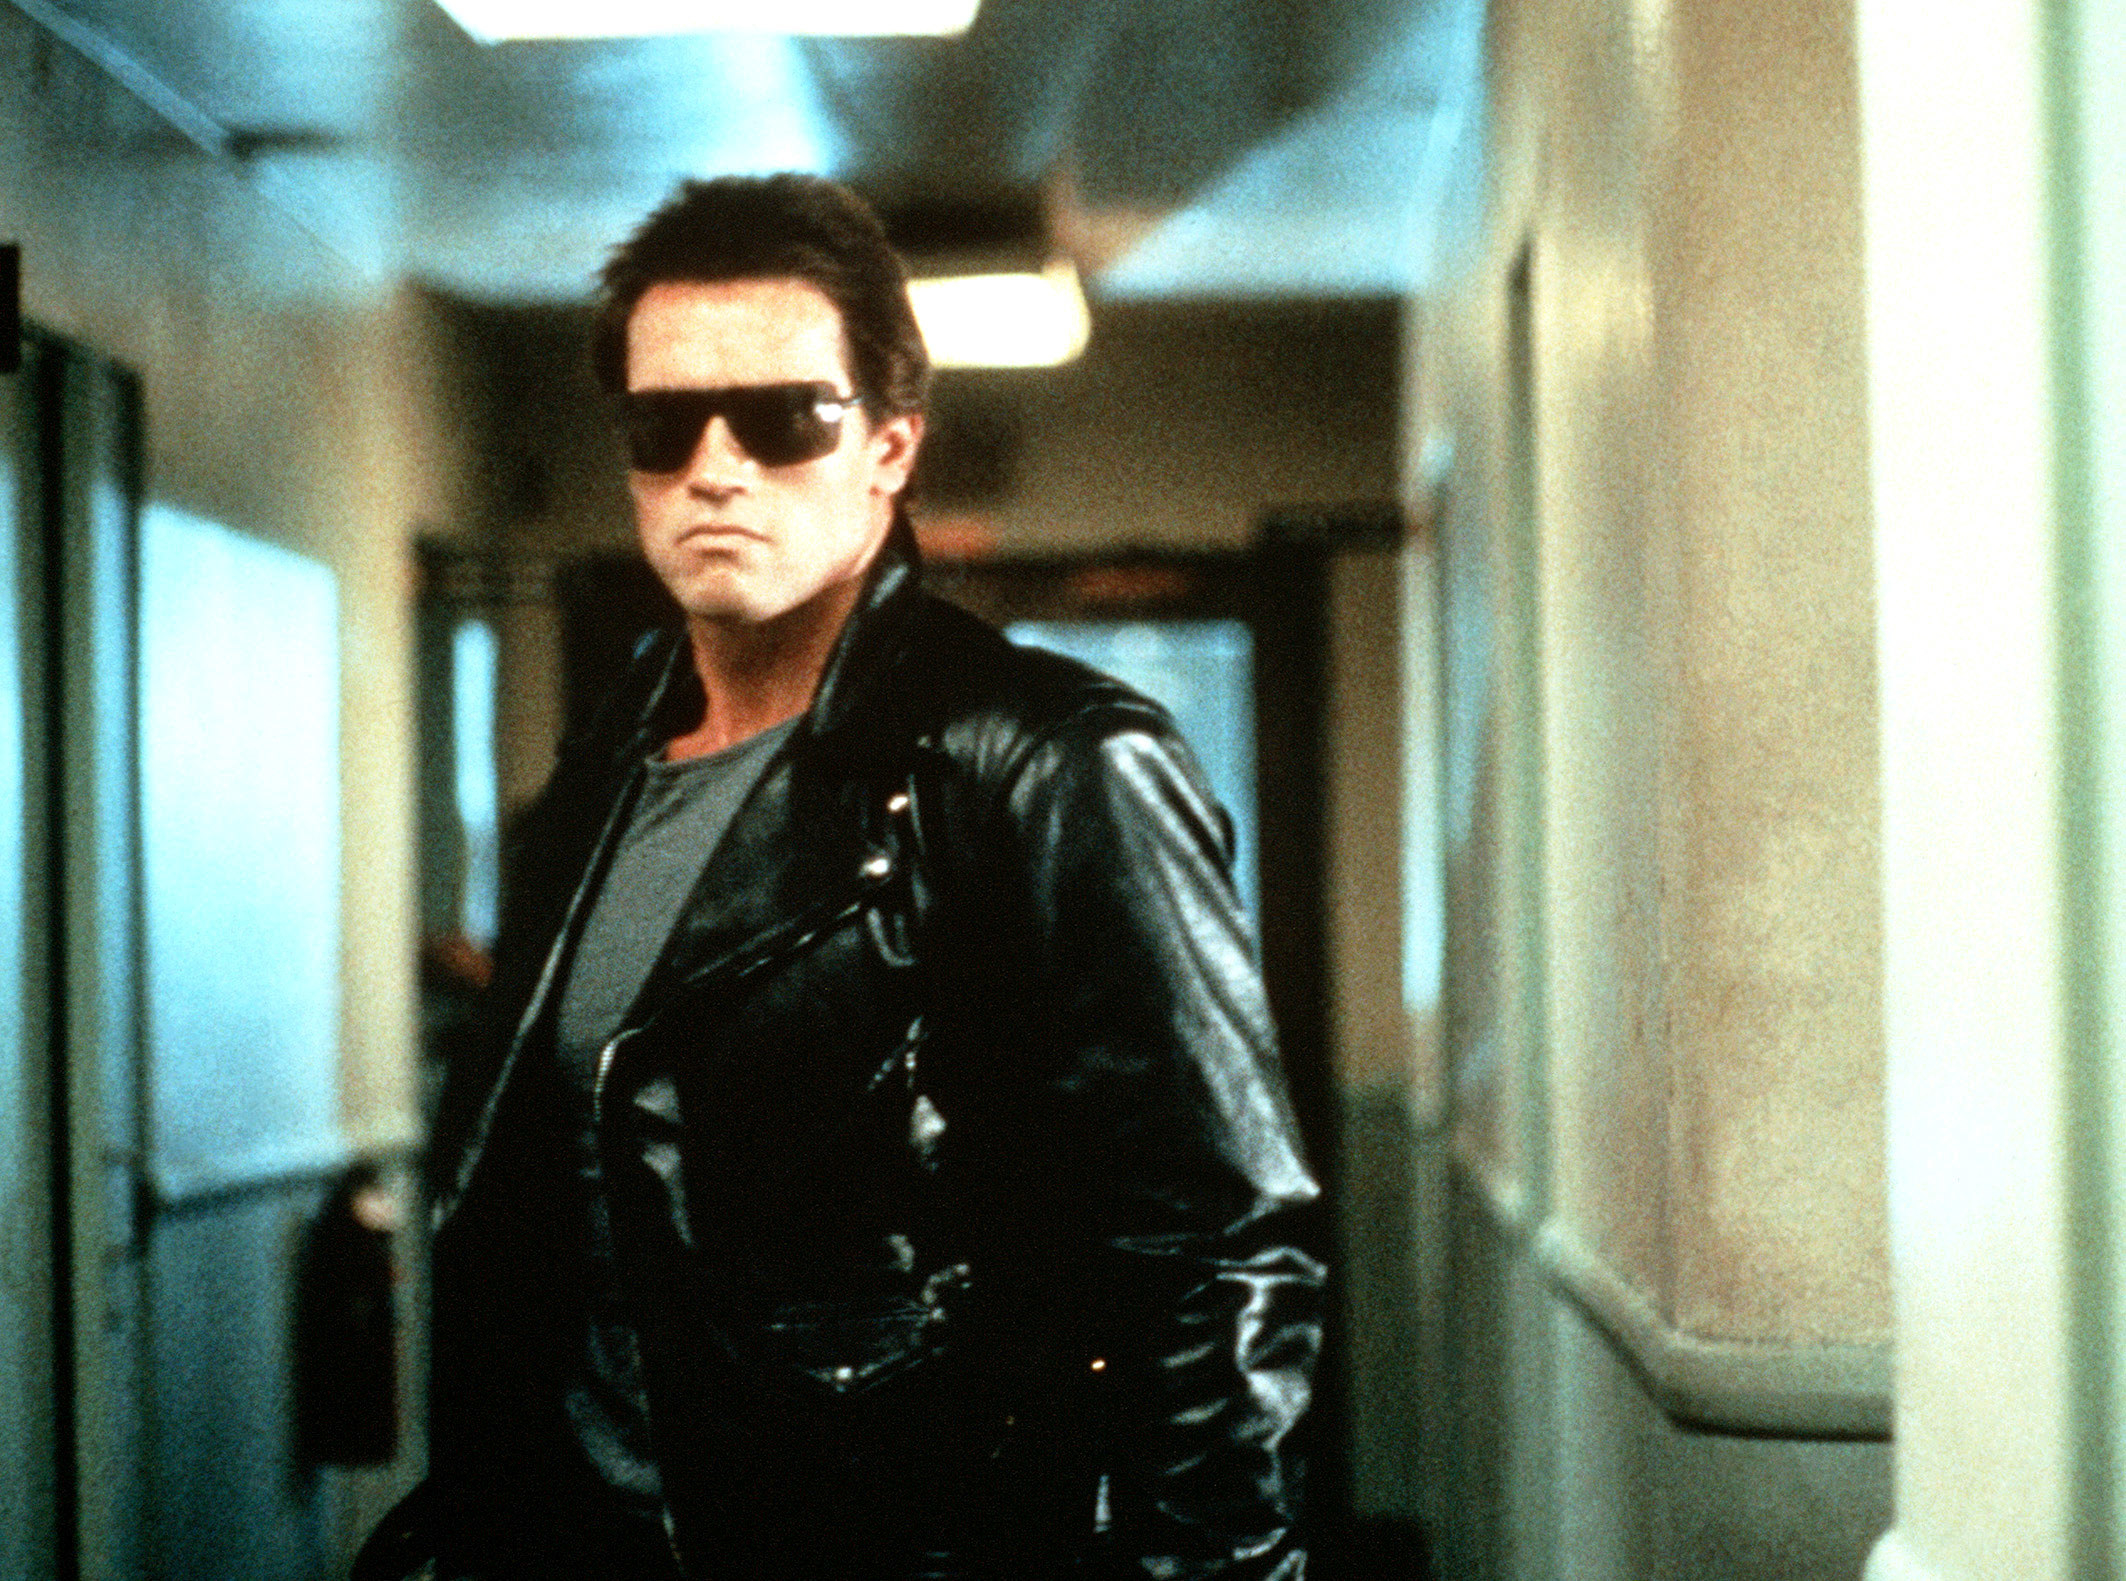 the Terminator wearing his signature sunglasses and leather jacket